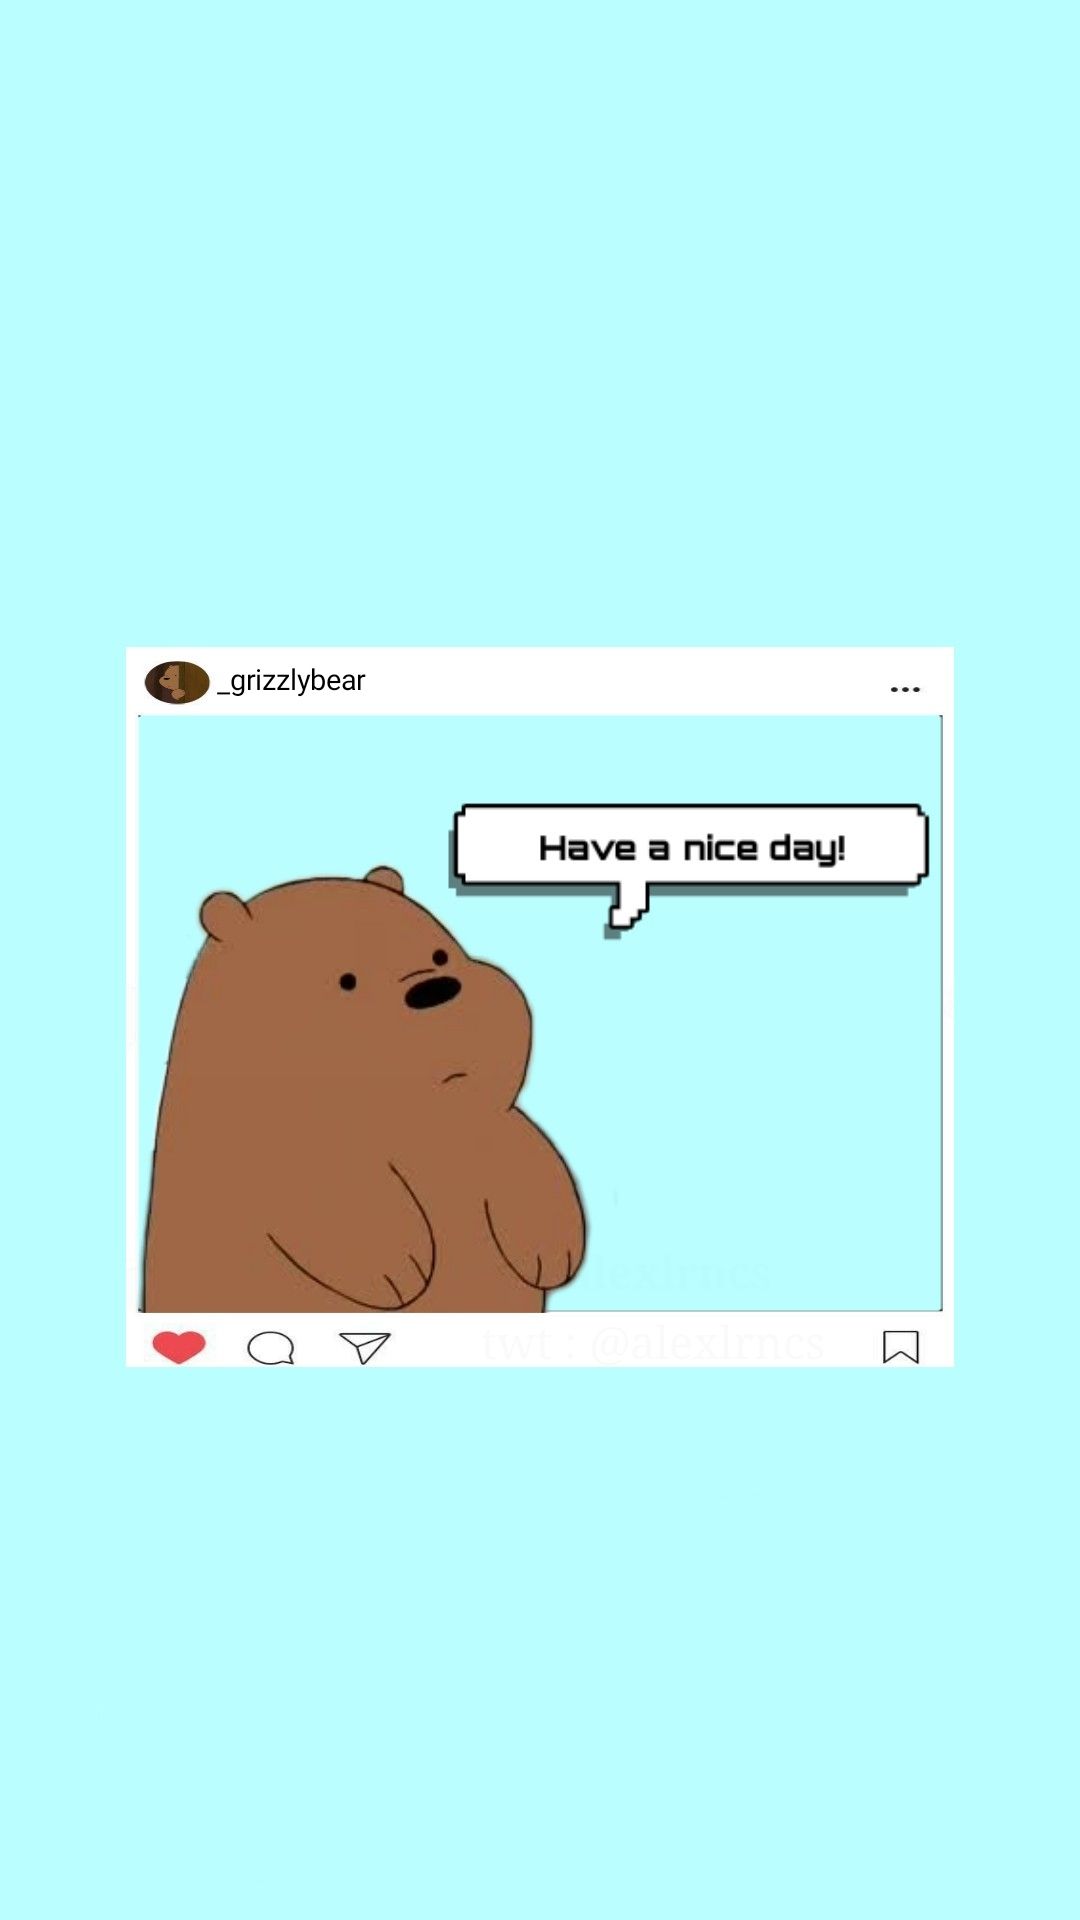 New! Baby Grizz has something to say! #webarebears #grizz #grizzlybear # grizzly #webarebearswallpaper #lockscreen #blue. We bare bears, Bare bears, Bear wallpaper